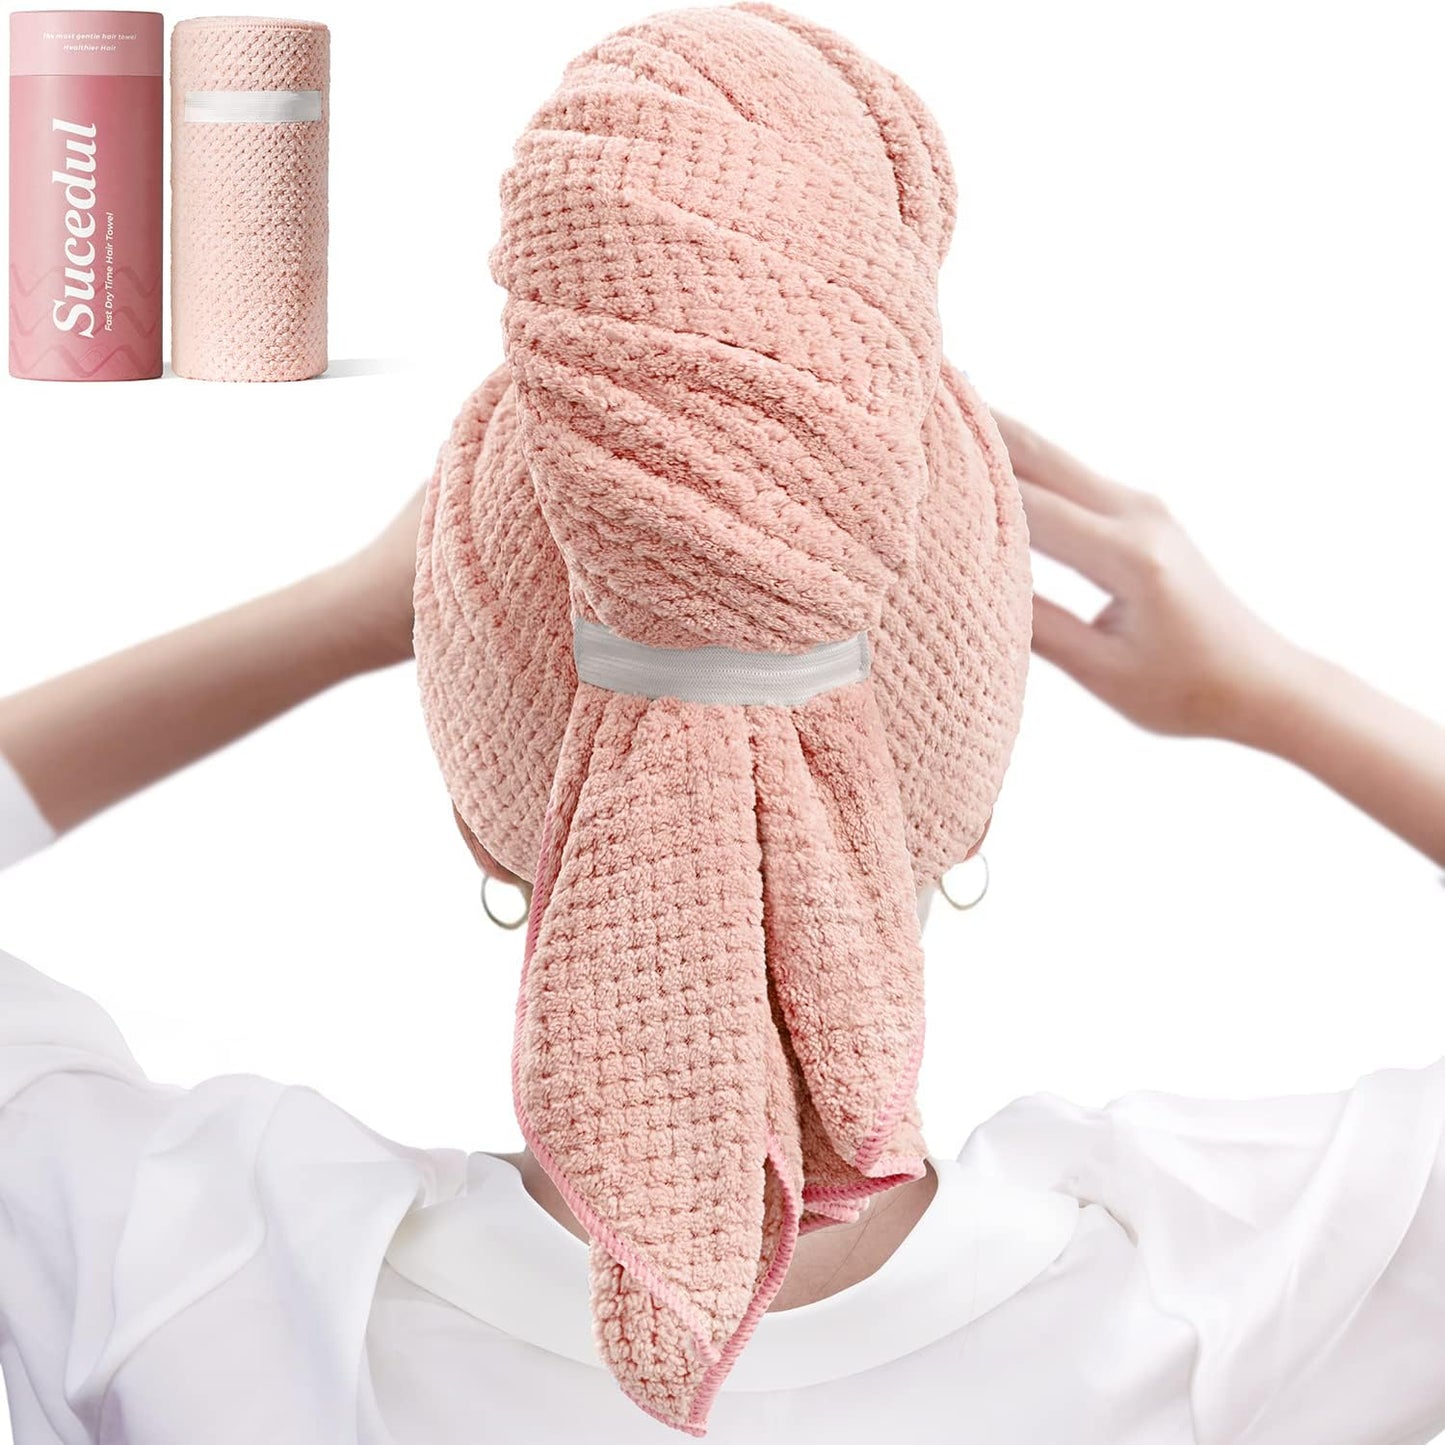 Large Microfiber Hair Towel Wrap for Women, Super Absorbent Hair Drying Towel with Elastic Strap, Anti Frizz Fast Drying Hair Turbans for Long, Thick, Curly Hair, Soft Hair Wrap Towels Pink